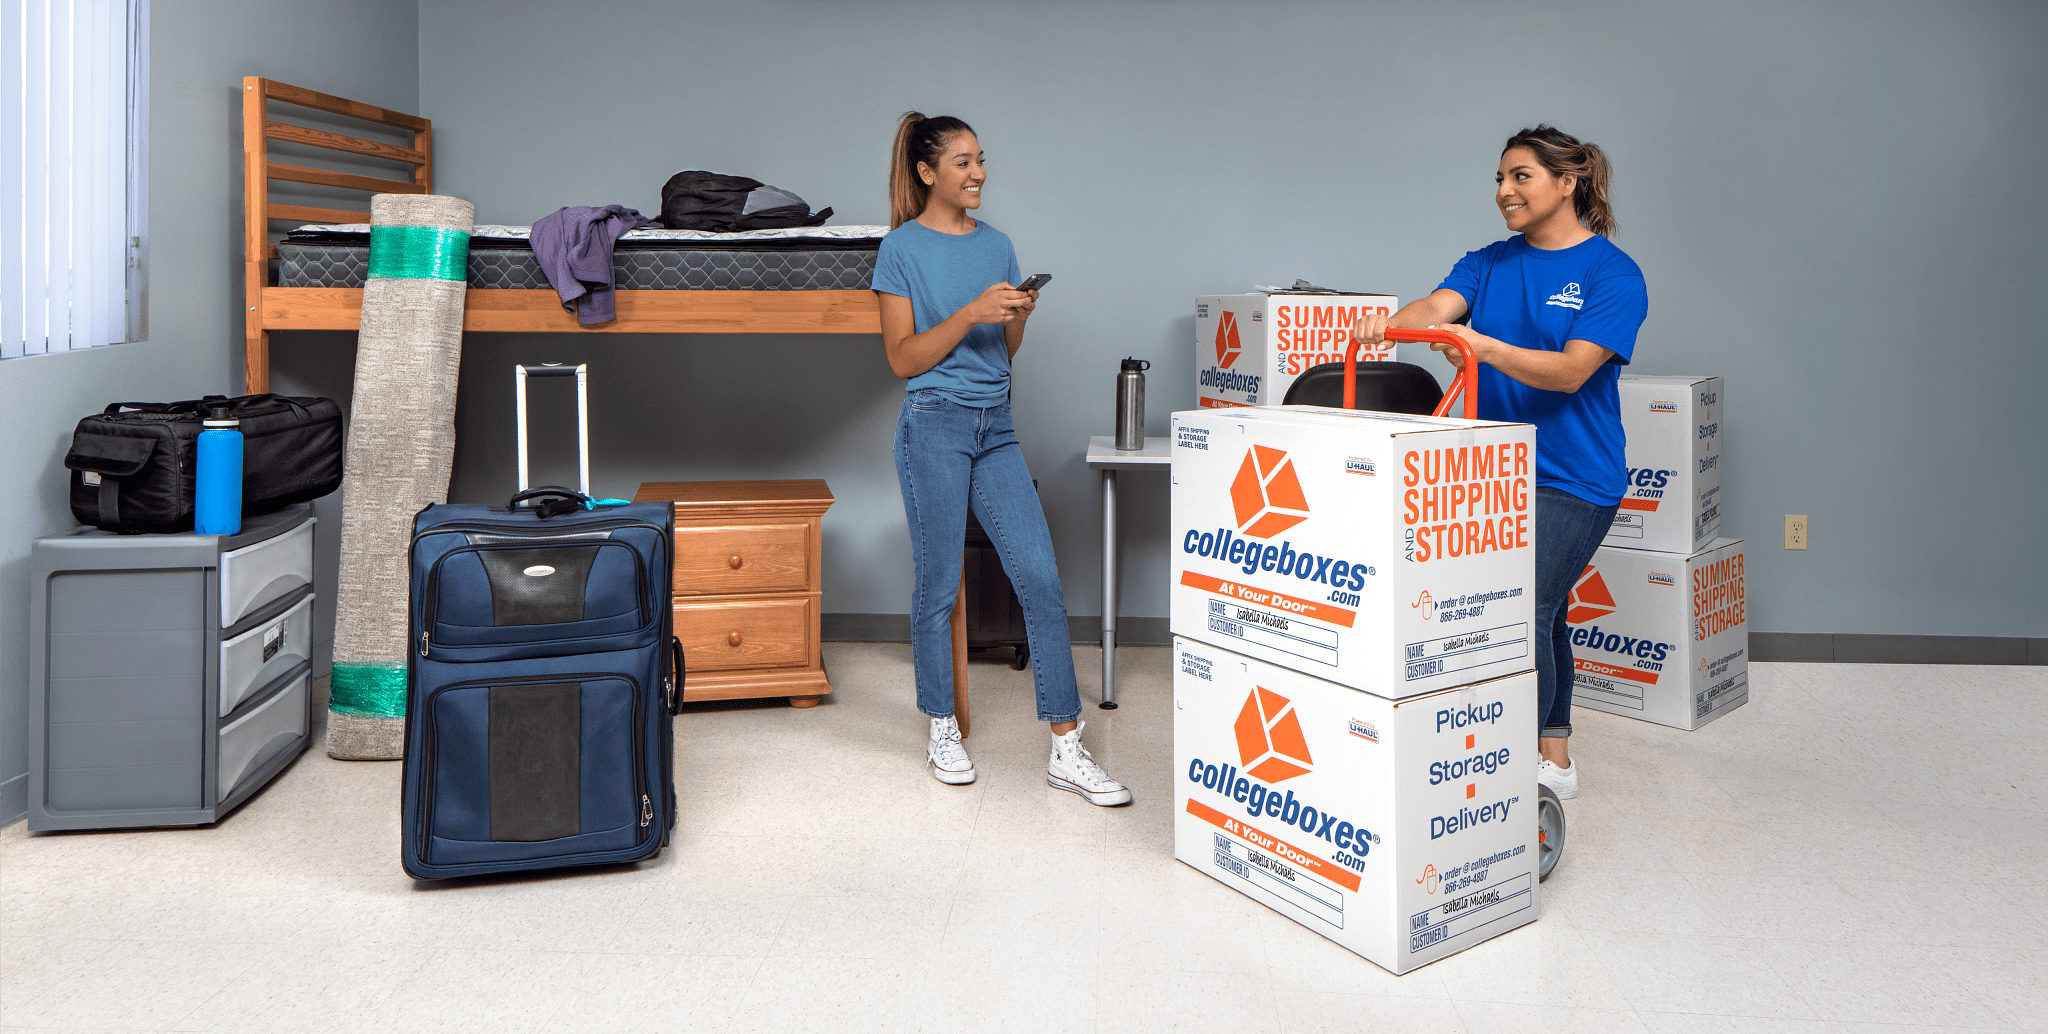 An international student is moving out of her dorm with Collegeboxes.